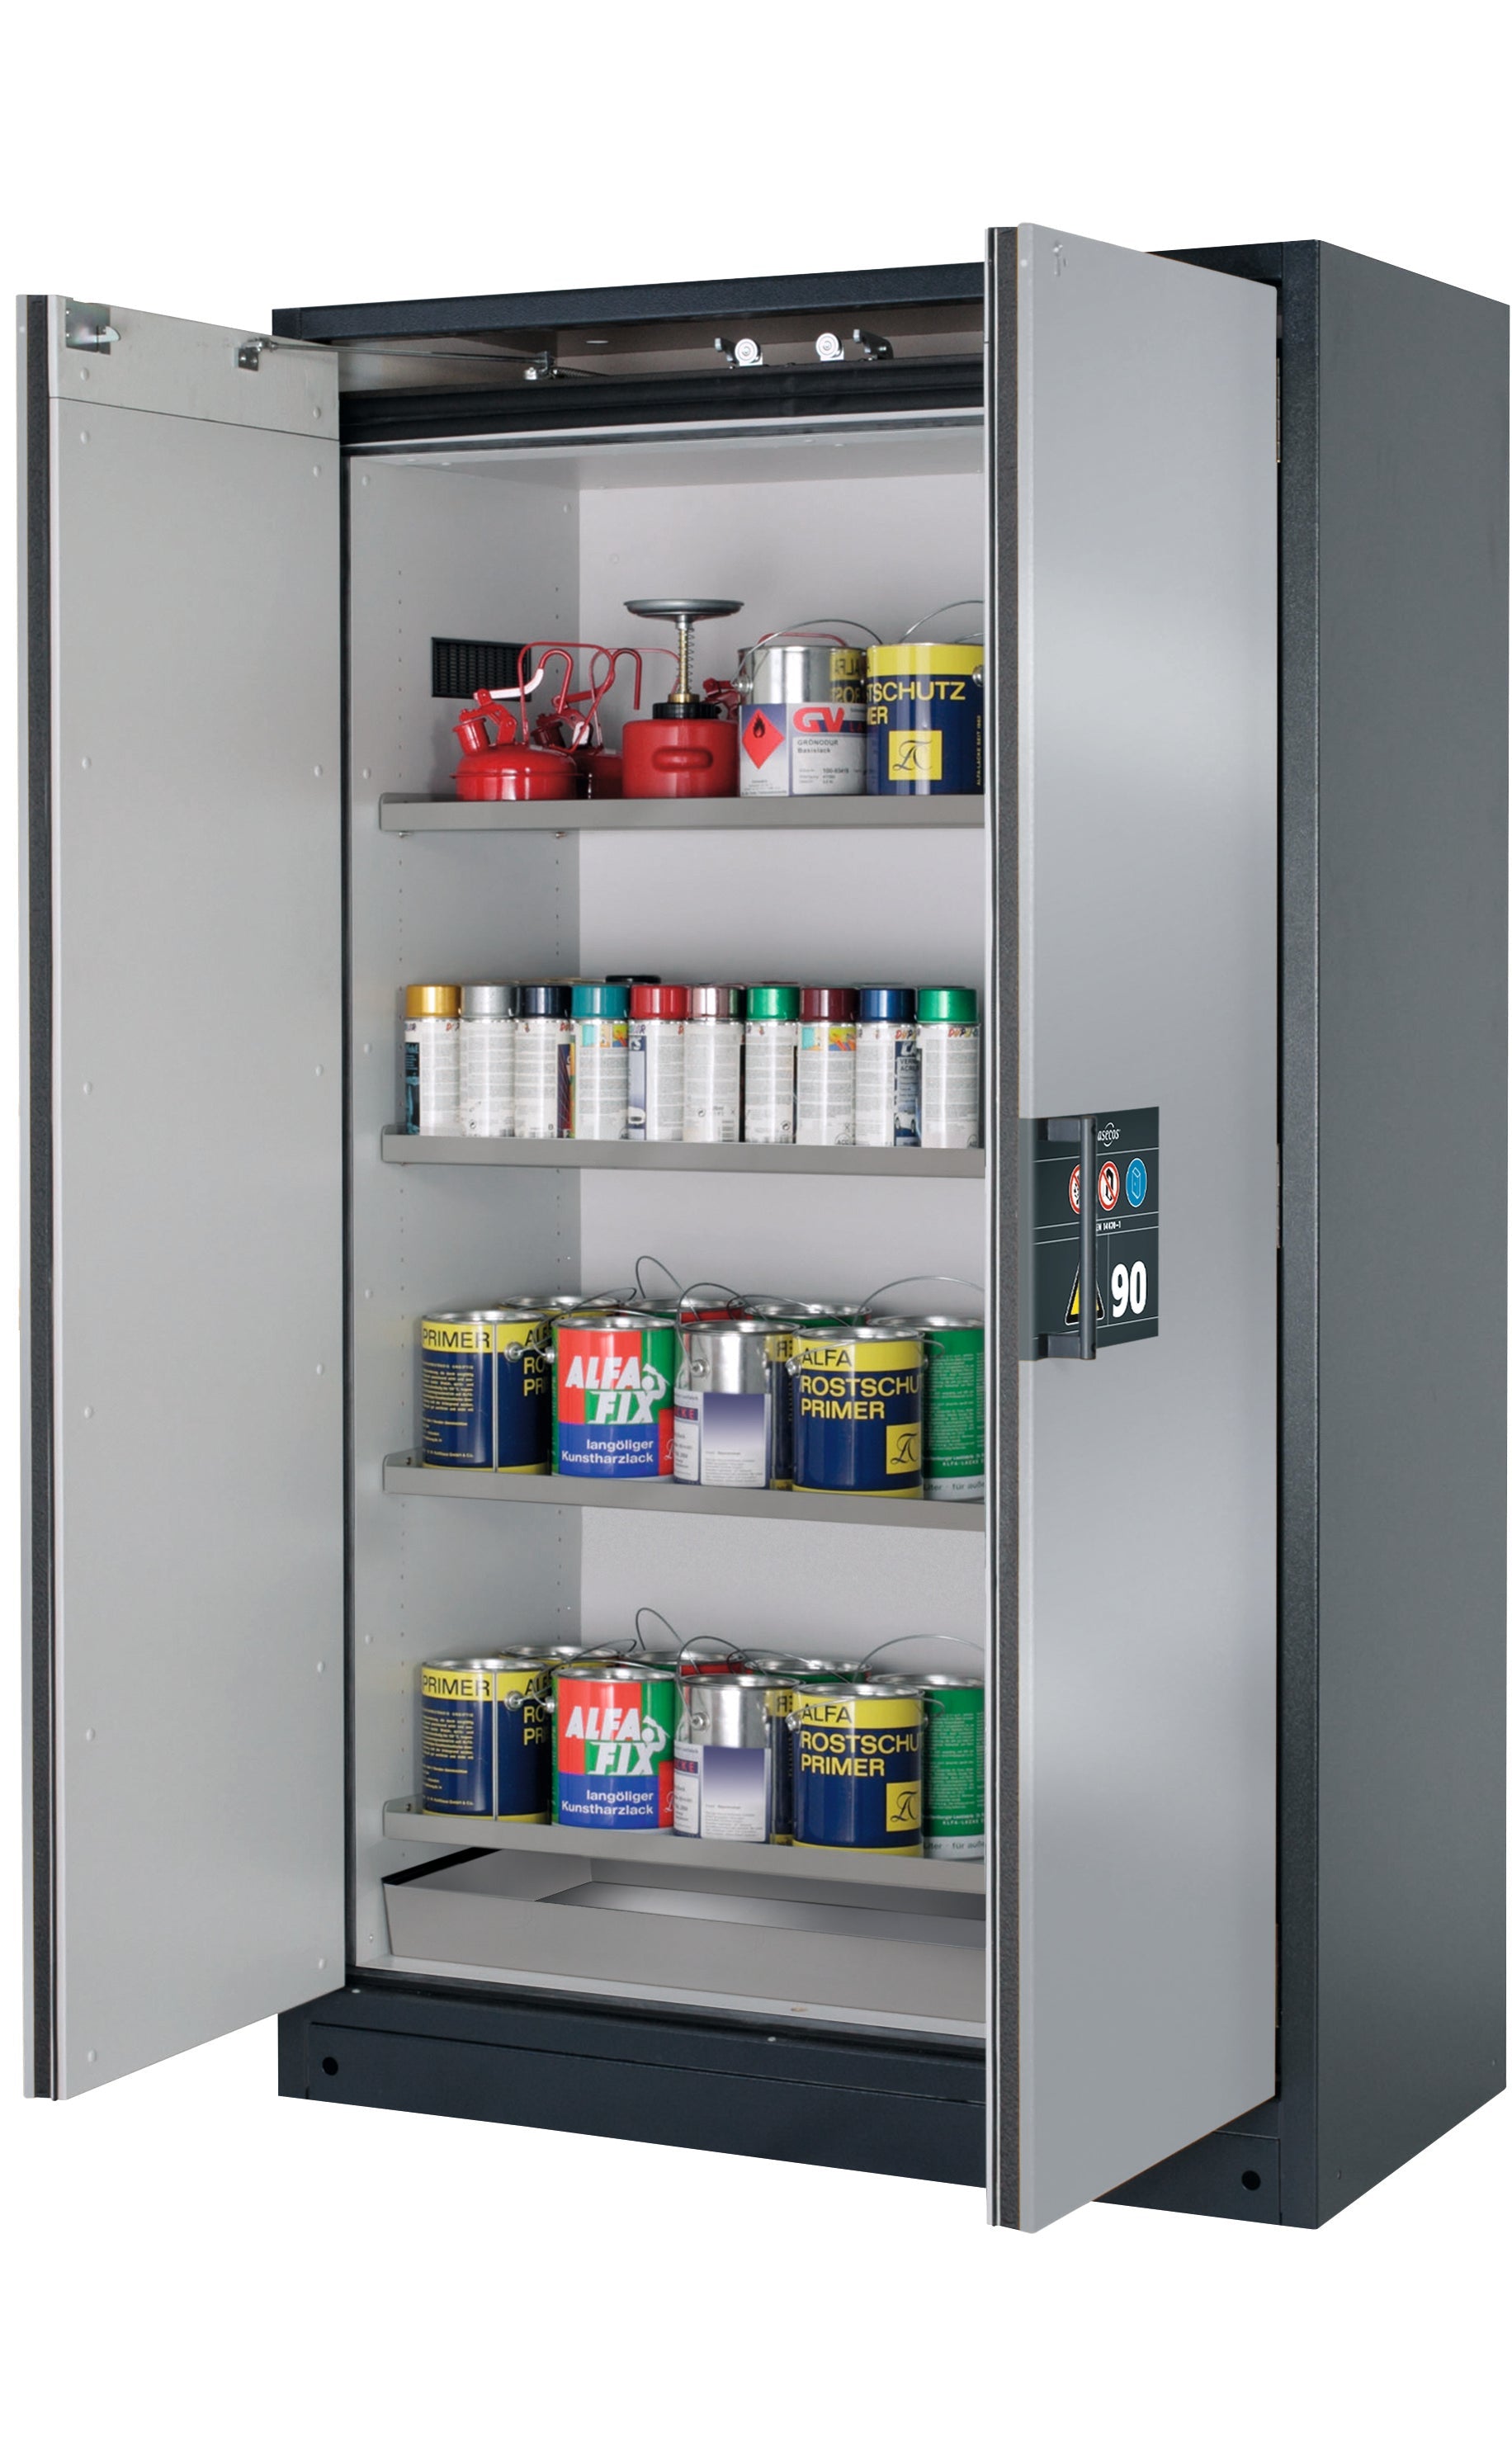 Type 90 safety storage cabinet Q-CLASSIC-90 model Q90.195.120 in asecos silver with 4x shelf standard (stainless steel 1.4301),